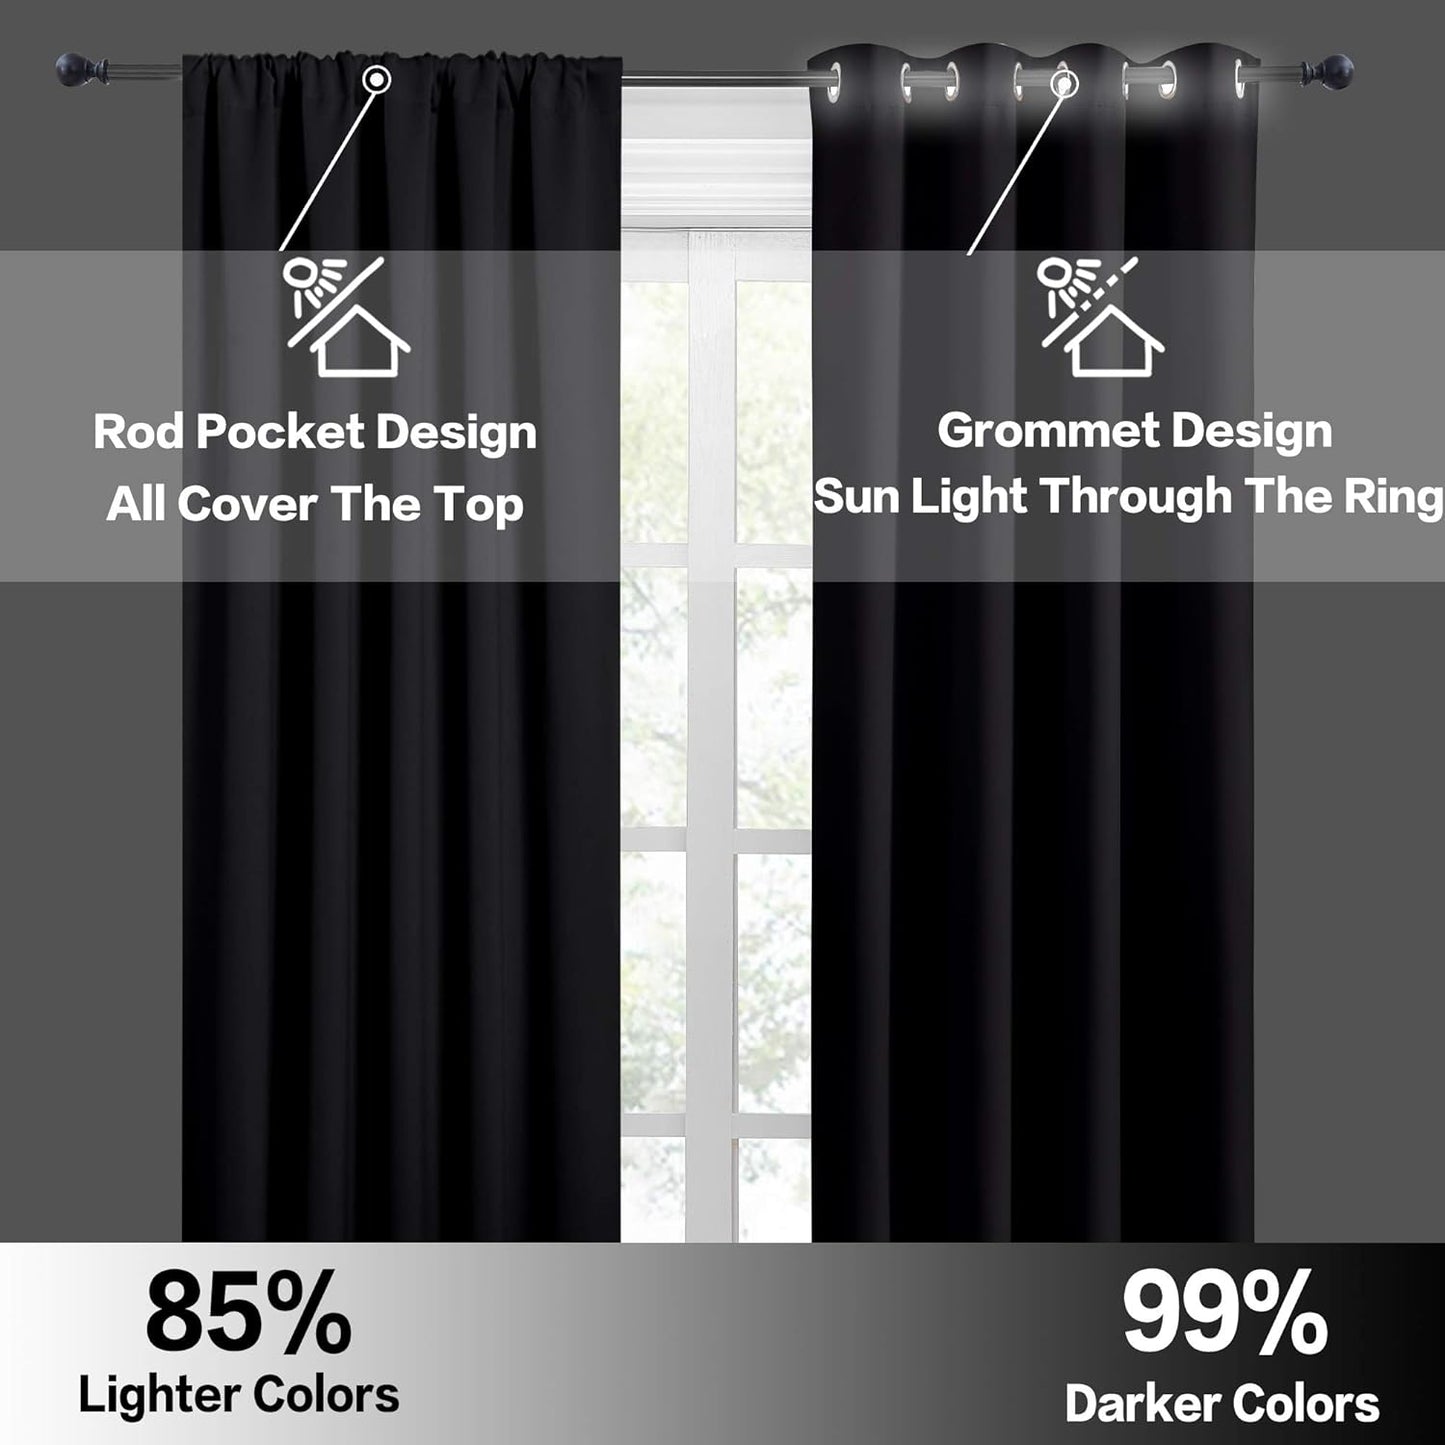 RYB HOME Black Curtains Blackout - Bathroom Small Window Curtains Thermal Insulated Privacy Drapes for Kids Bedroom Living Room Kitchen Basement, Width 42 by Length 36, 1 Pair  RYB HOME   